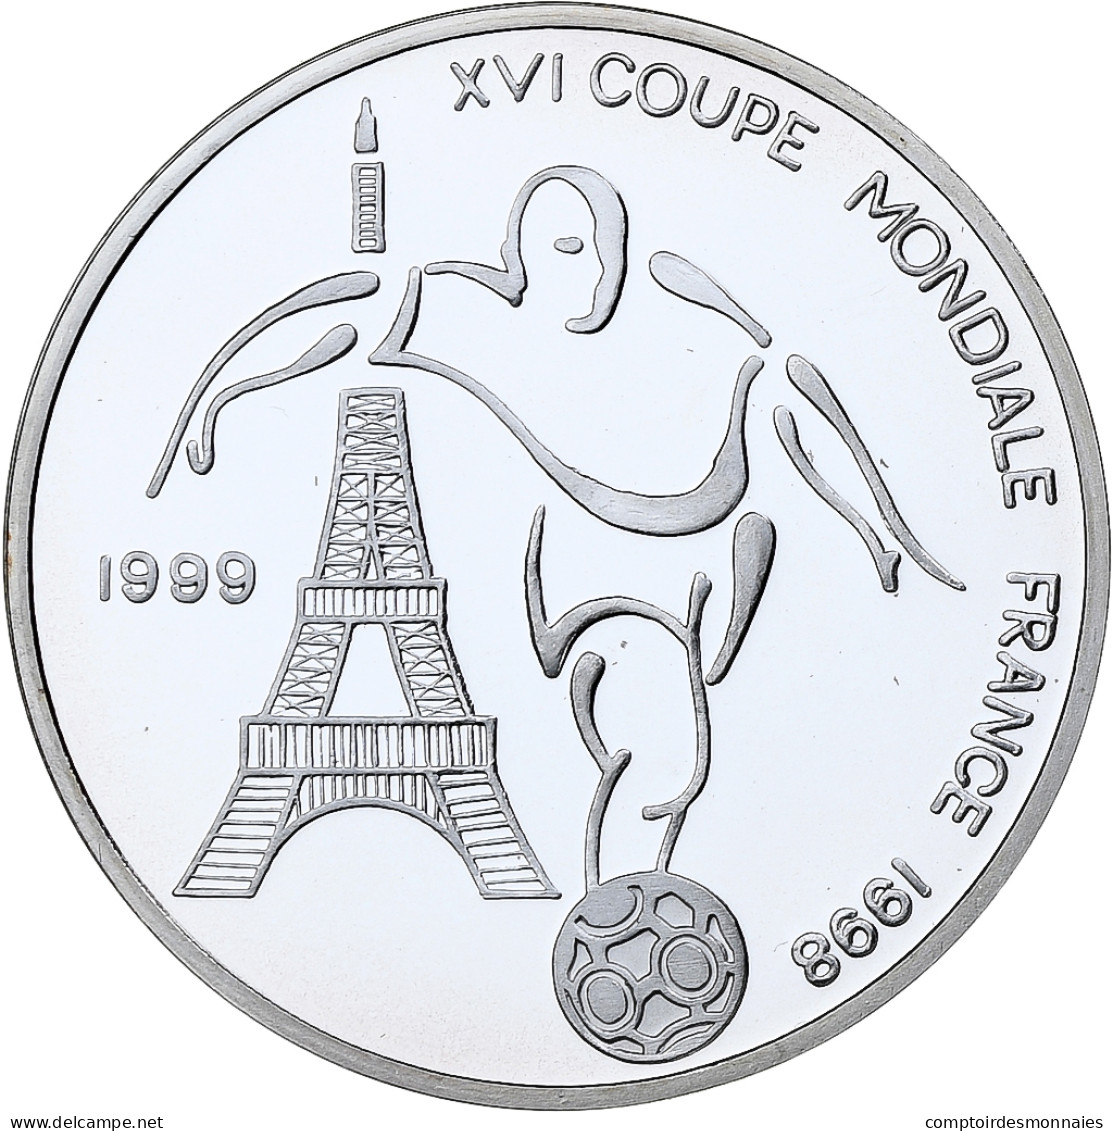 Tchad, 1000 Francs, World Cup France 1998, 1999, BE, Argent, FDC - Tschad